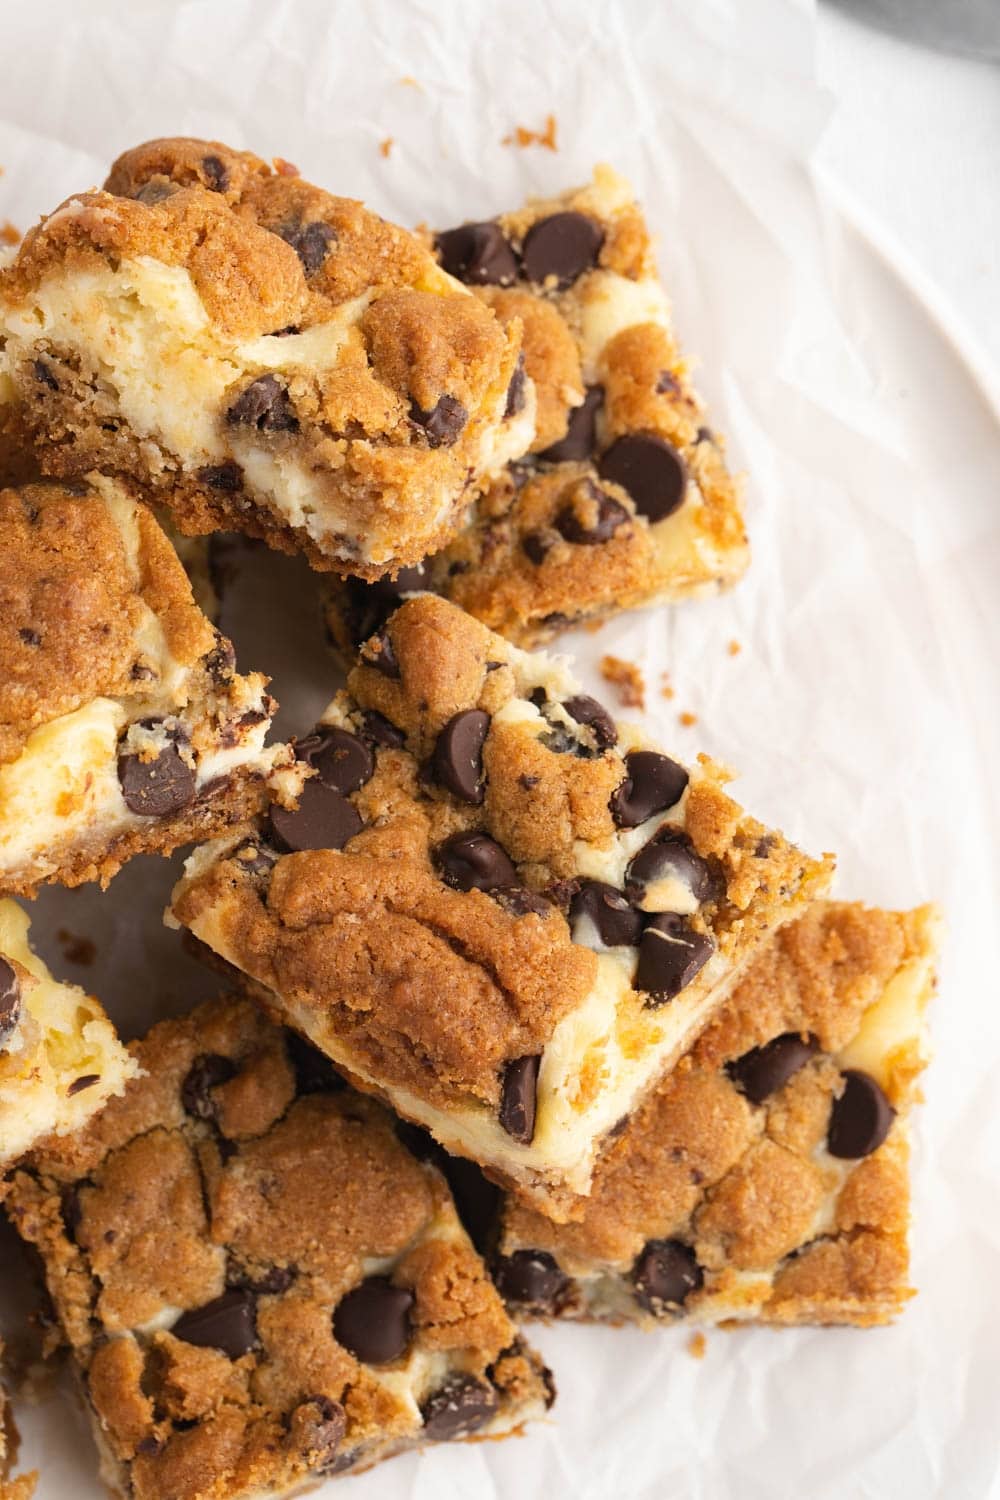 Sliced Chocolate Chip Cheesecake Bars on a Parchment Paper